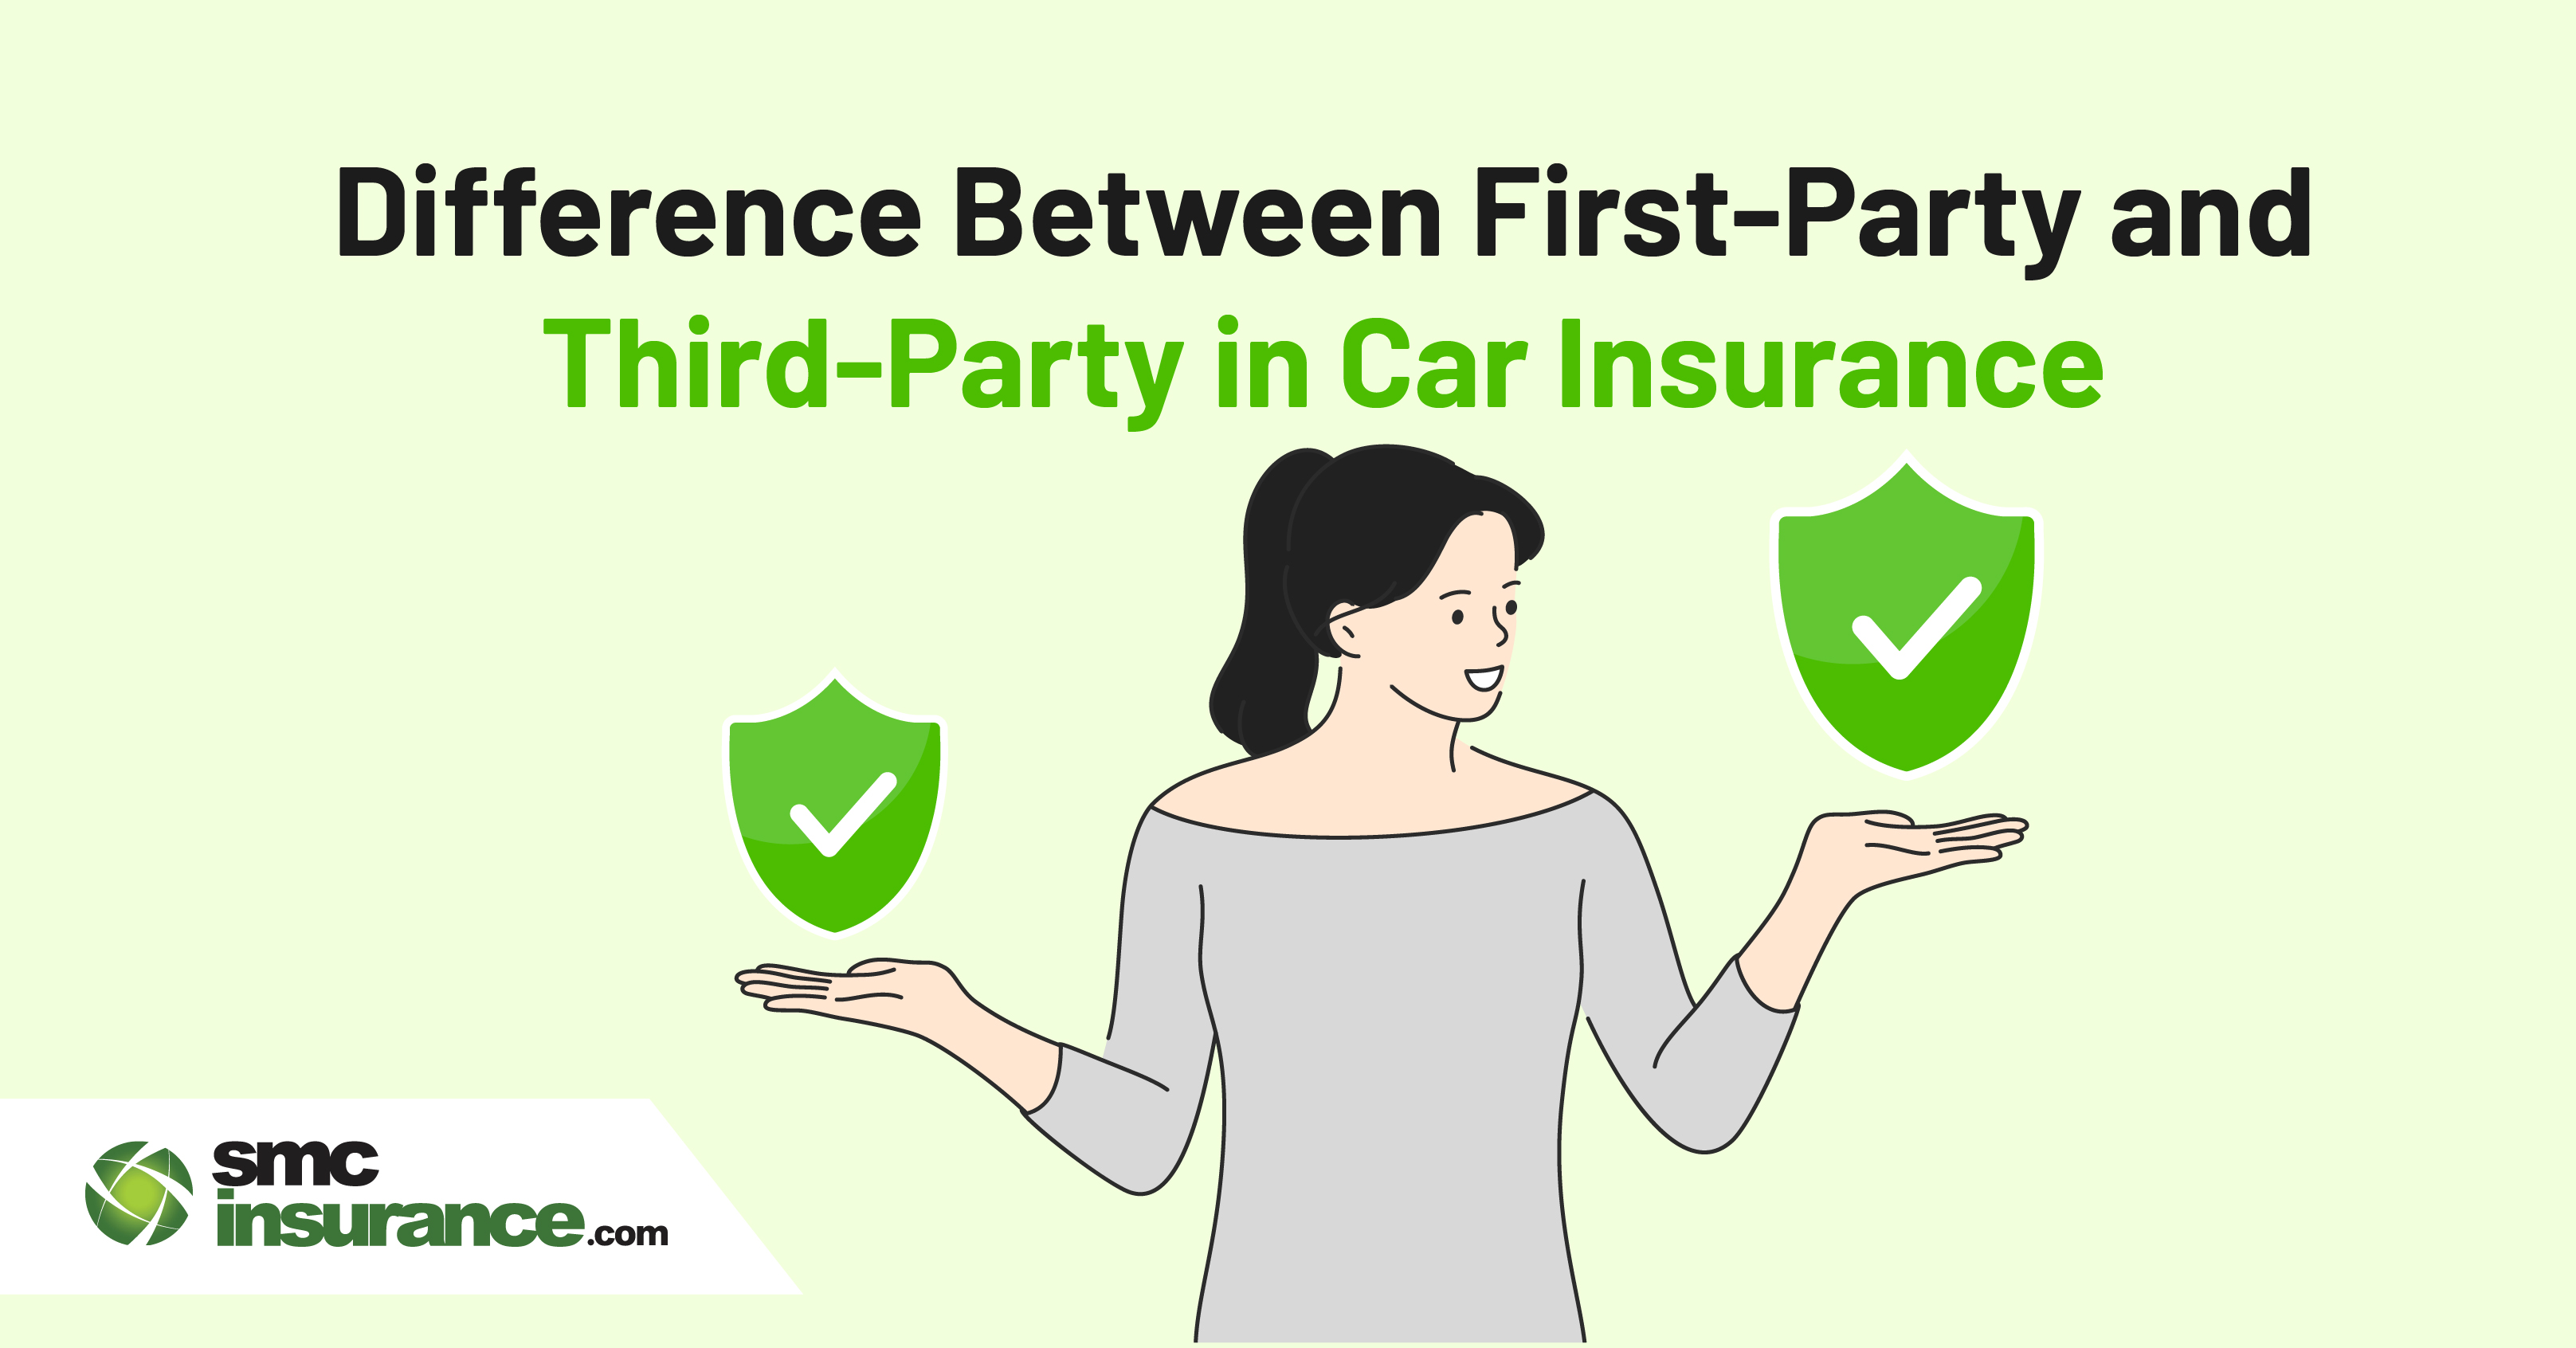 Difference Between First-Party and Third-Party in Car Insurance